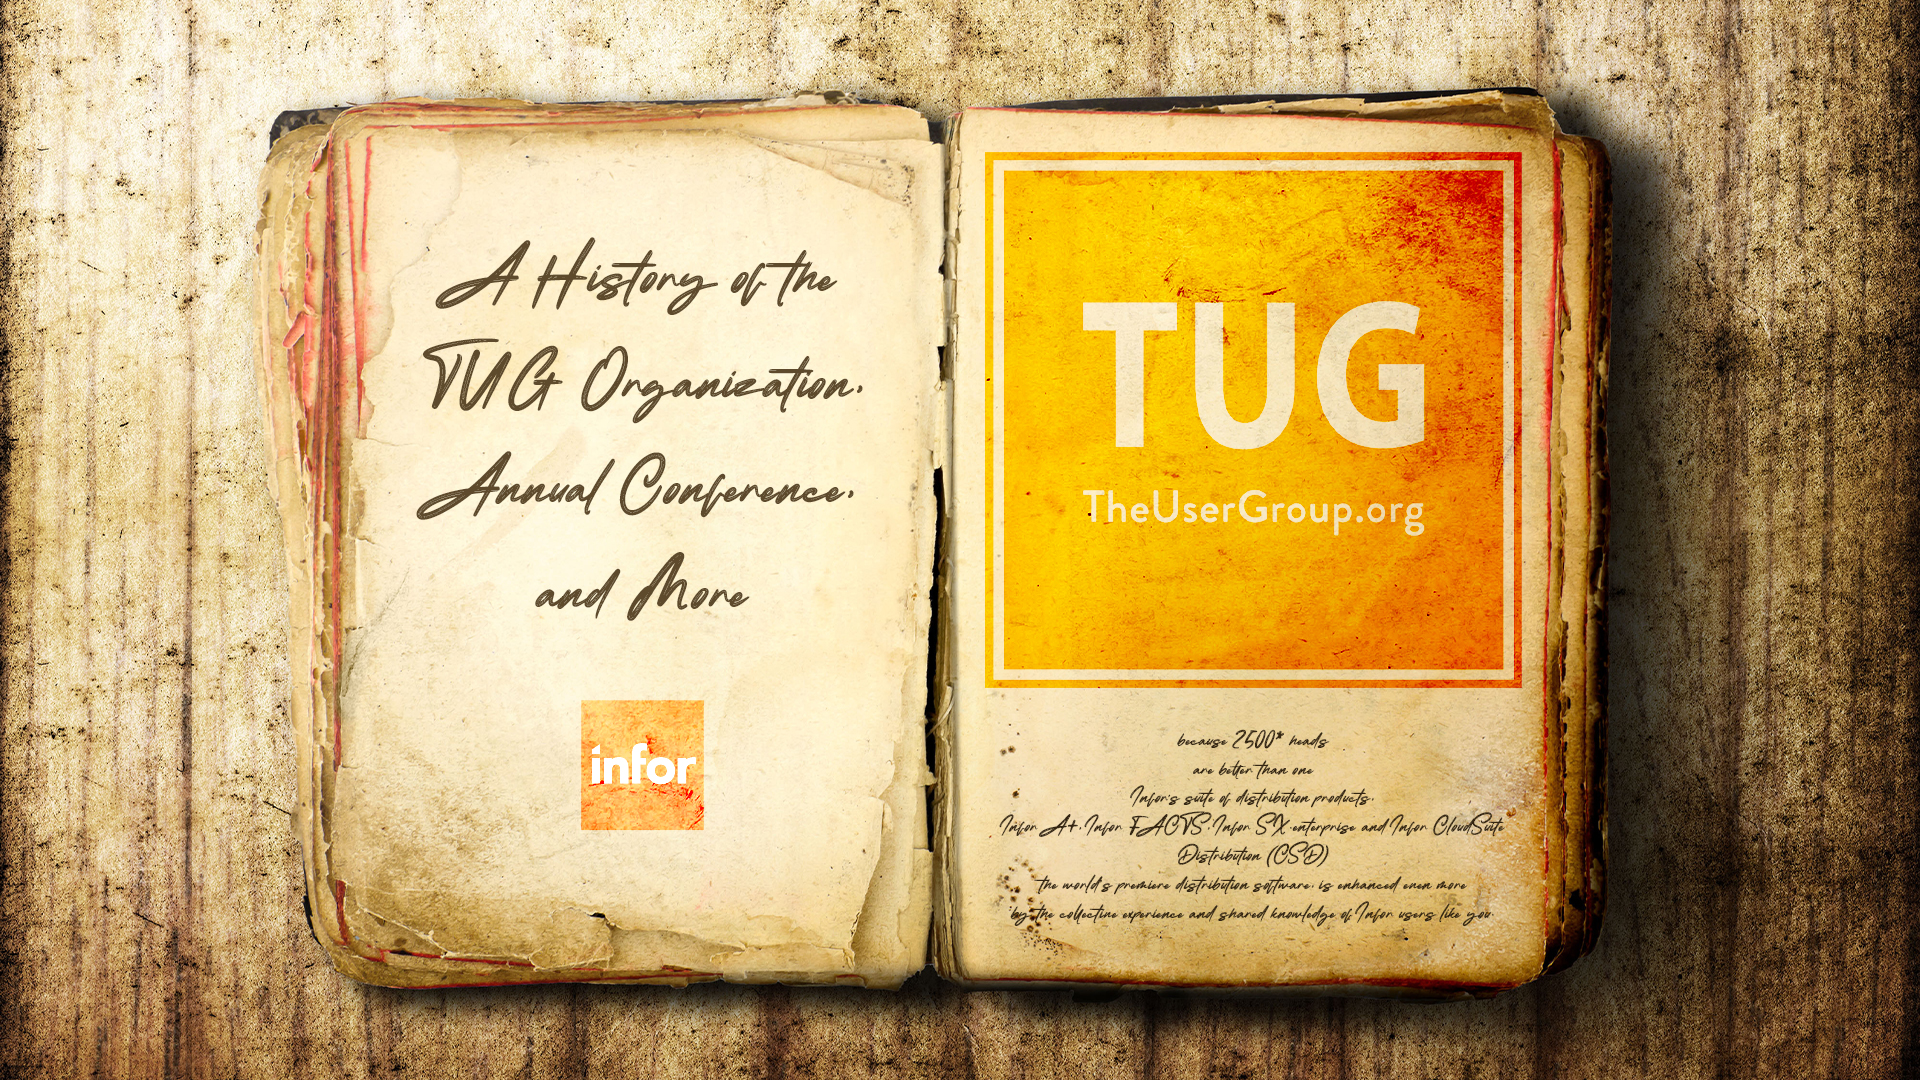 The TUG Organization – The History, Annual Conference, and More